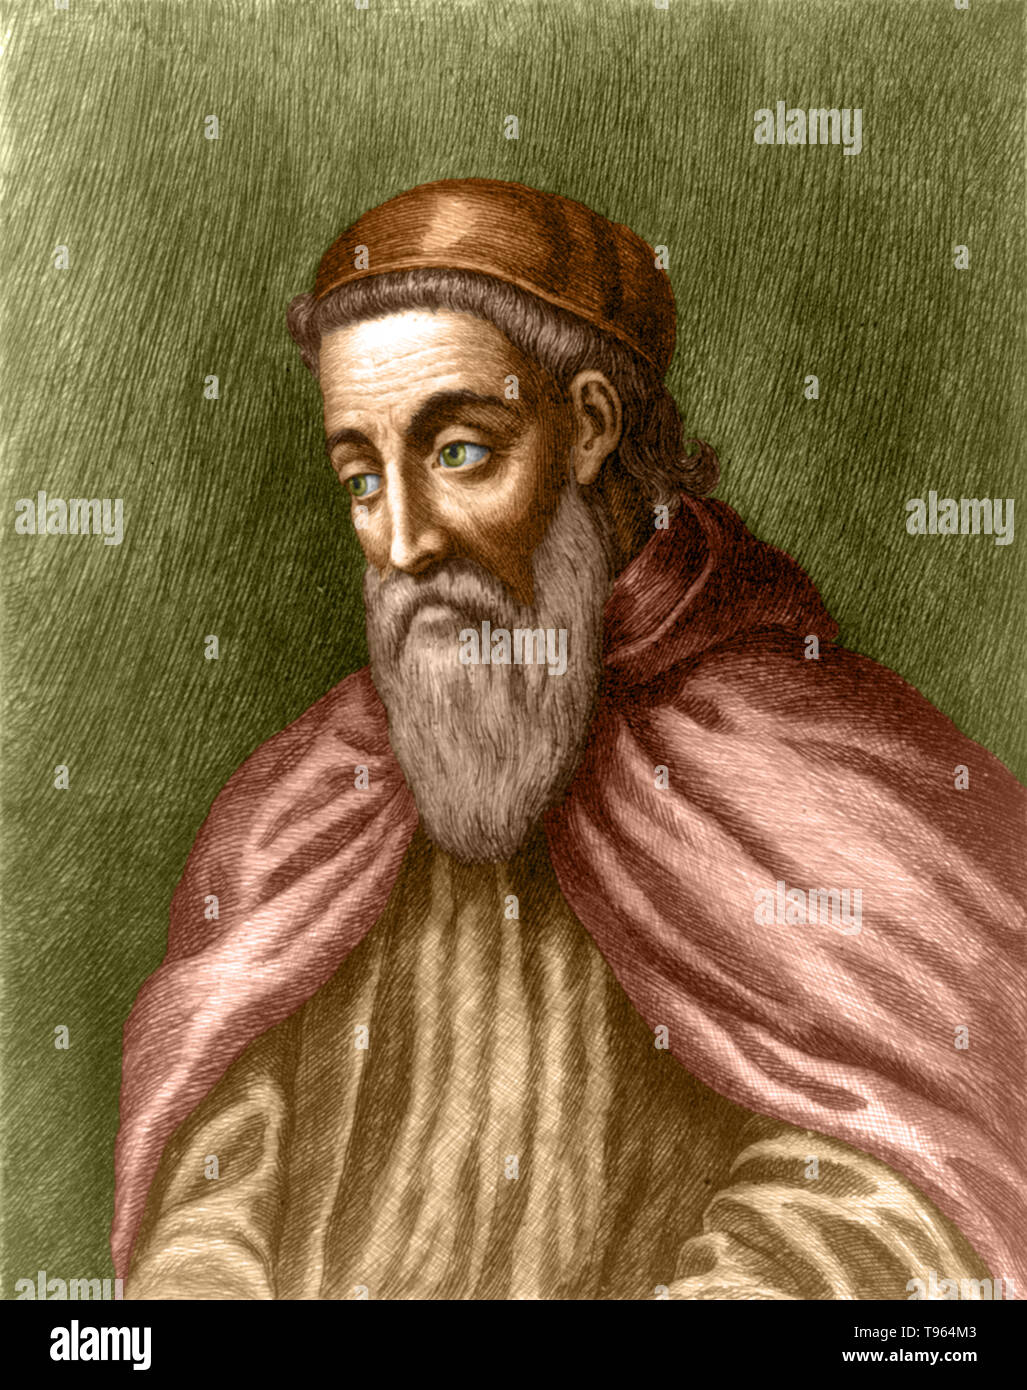 Amerigo Vespucci (March 9, 1454 - February 22, 1512) was an Italian explorer, financier, navigator and cartographer. At the invitation of king Manuel I of Portugal, Vespucci participated as observer in several voyages that explored the east coast of South America between 1499 and 1502. On the first of these voyages he was aboard the ship that discovered that South America extended much further south than previously thought. Stock Photo